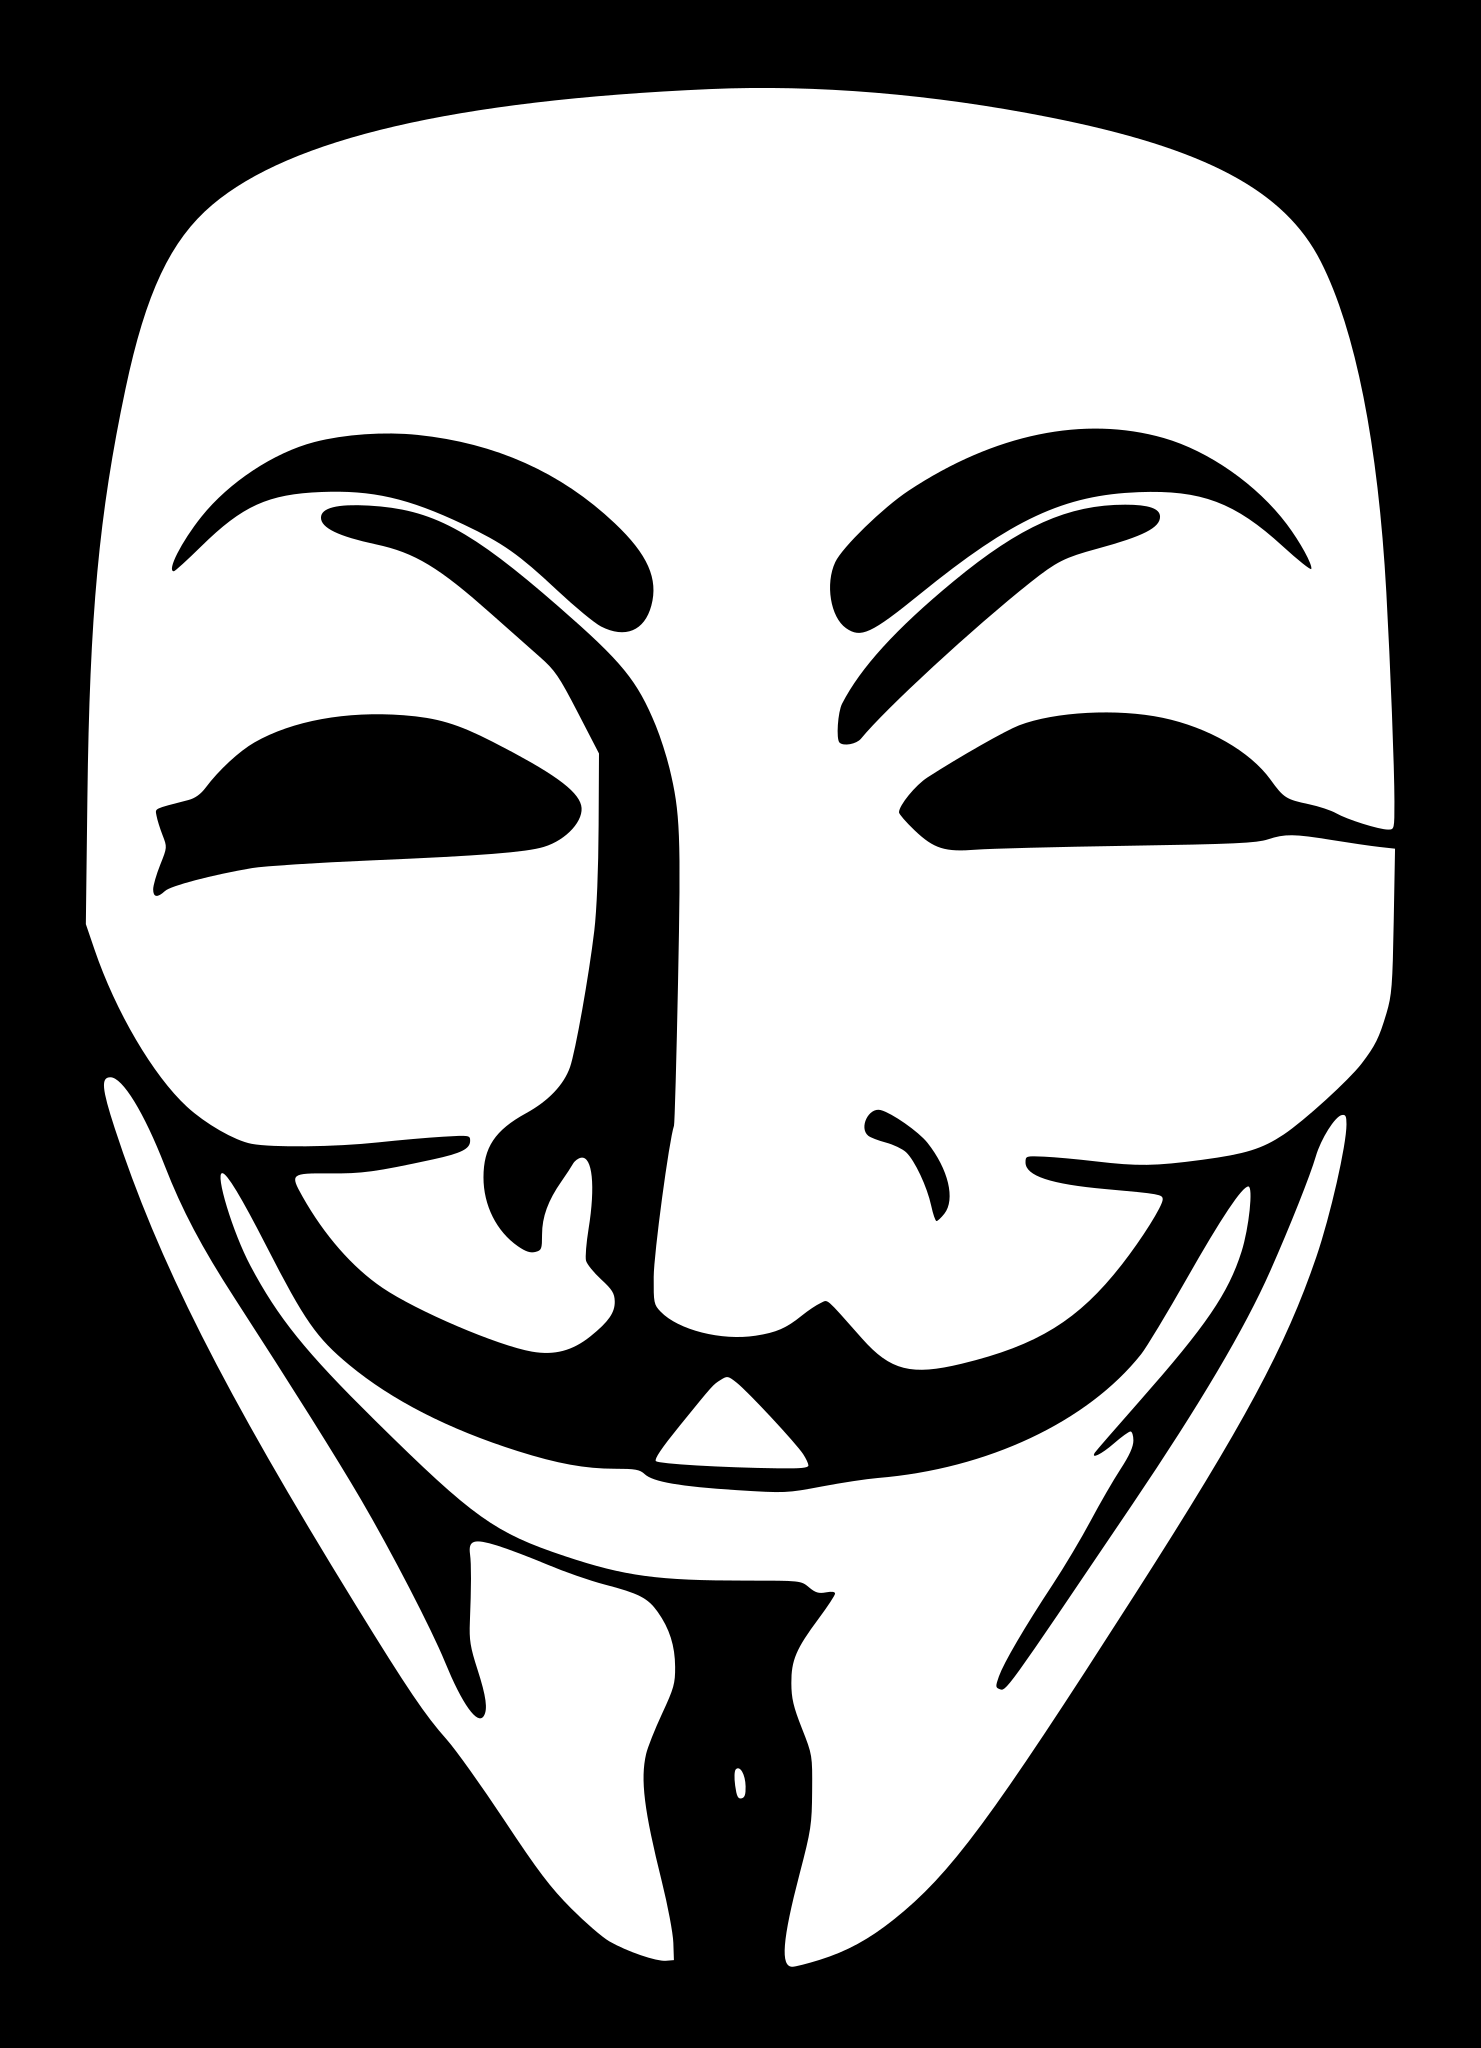 1481px-Anonymous.svg.png